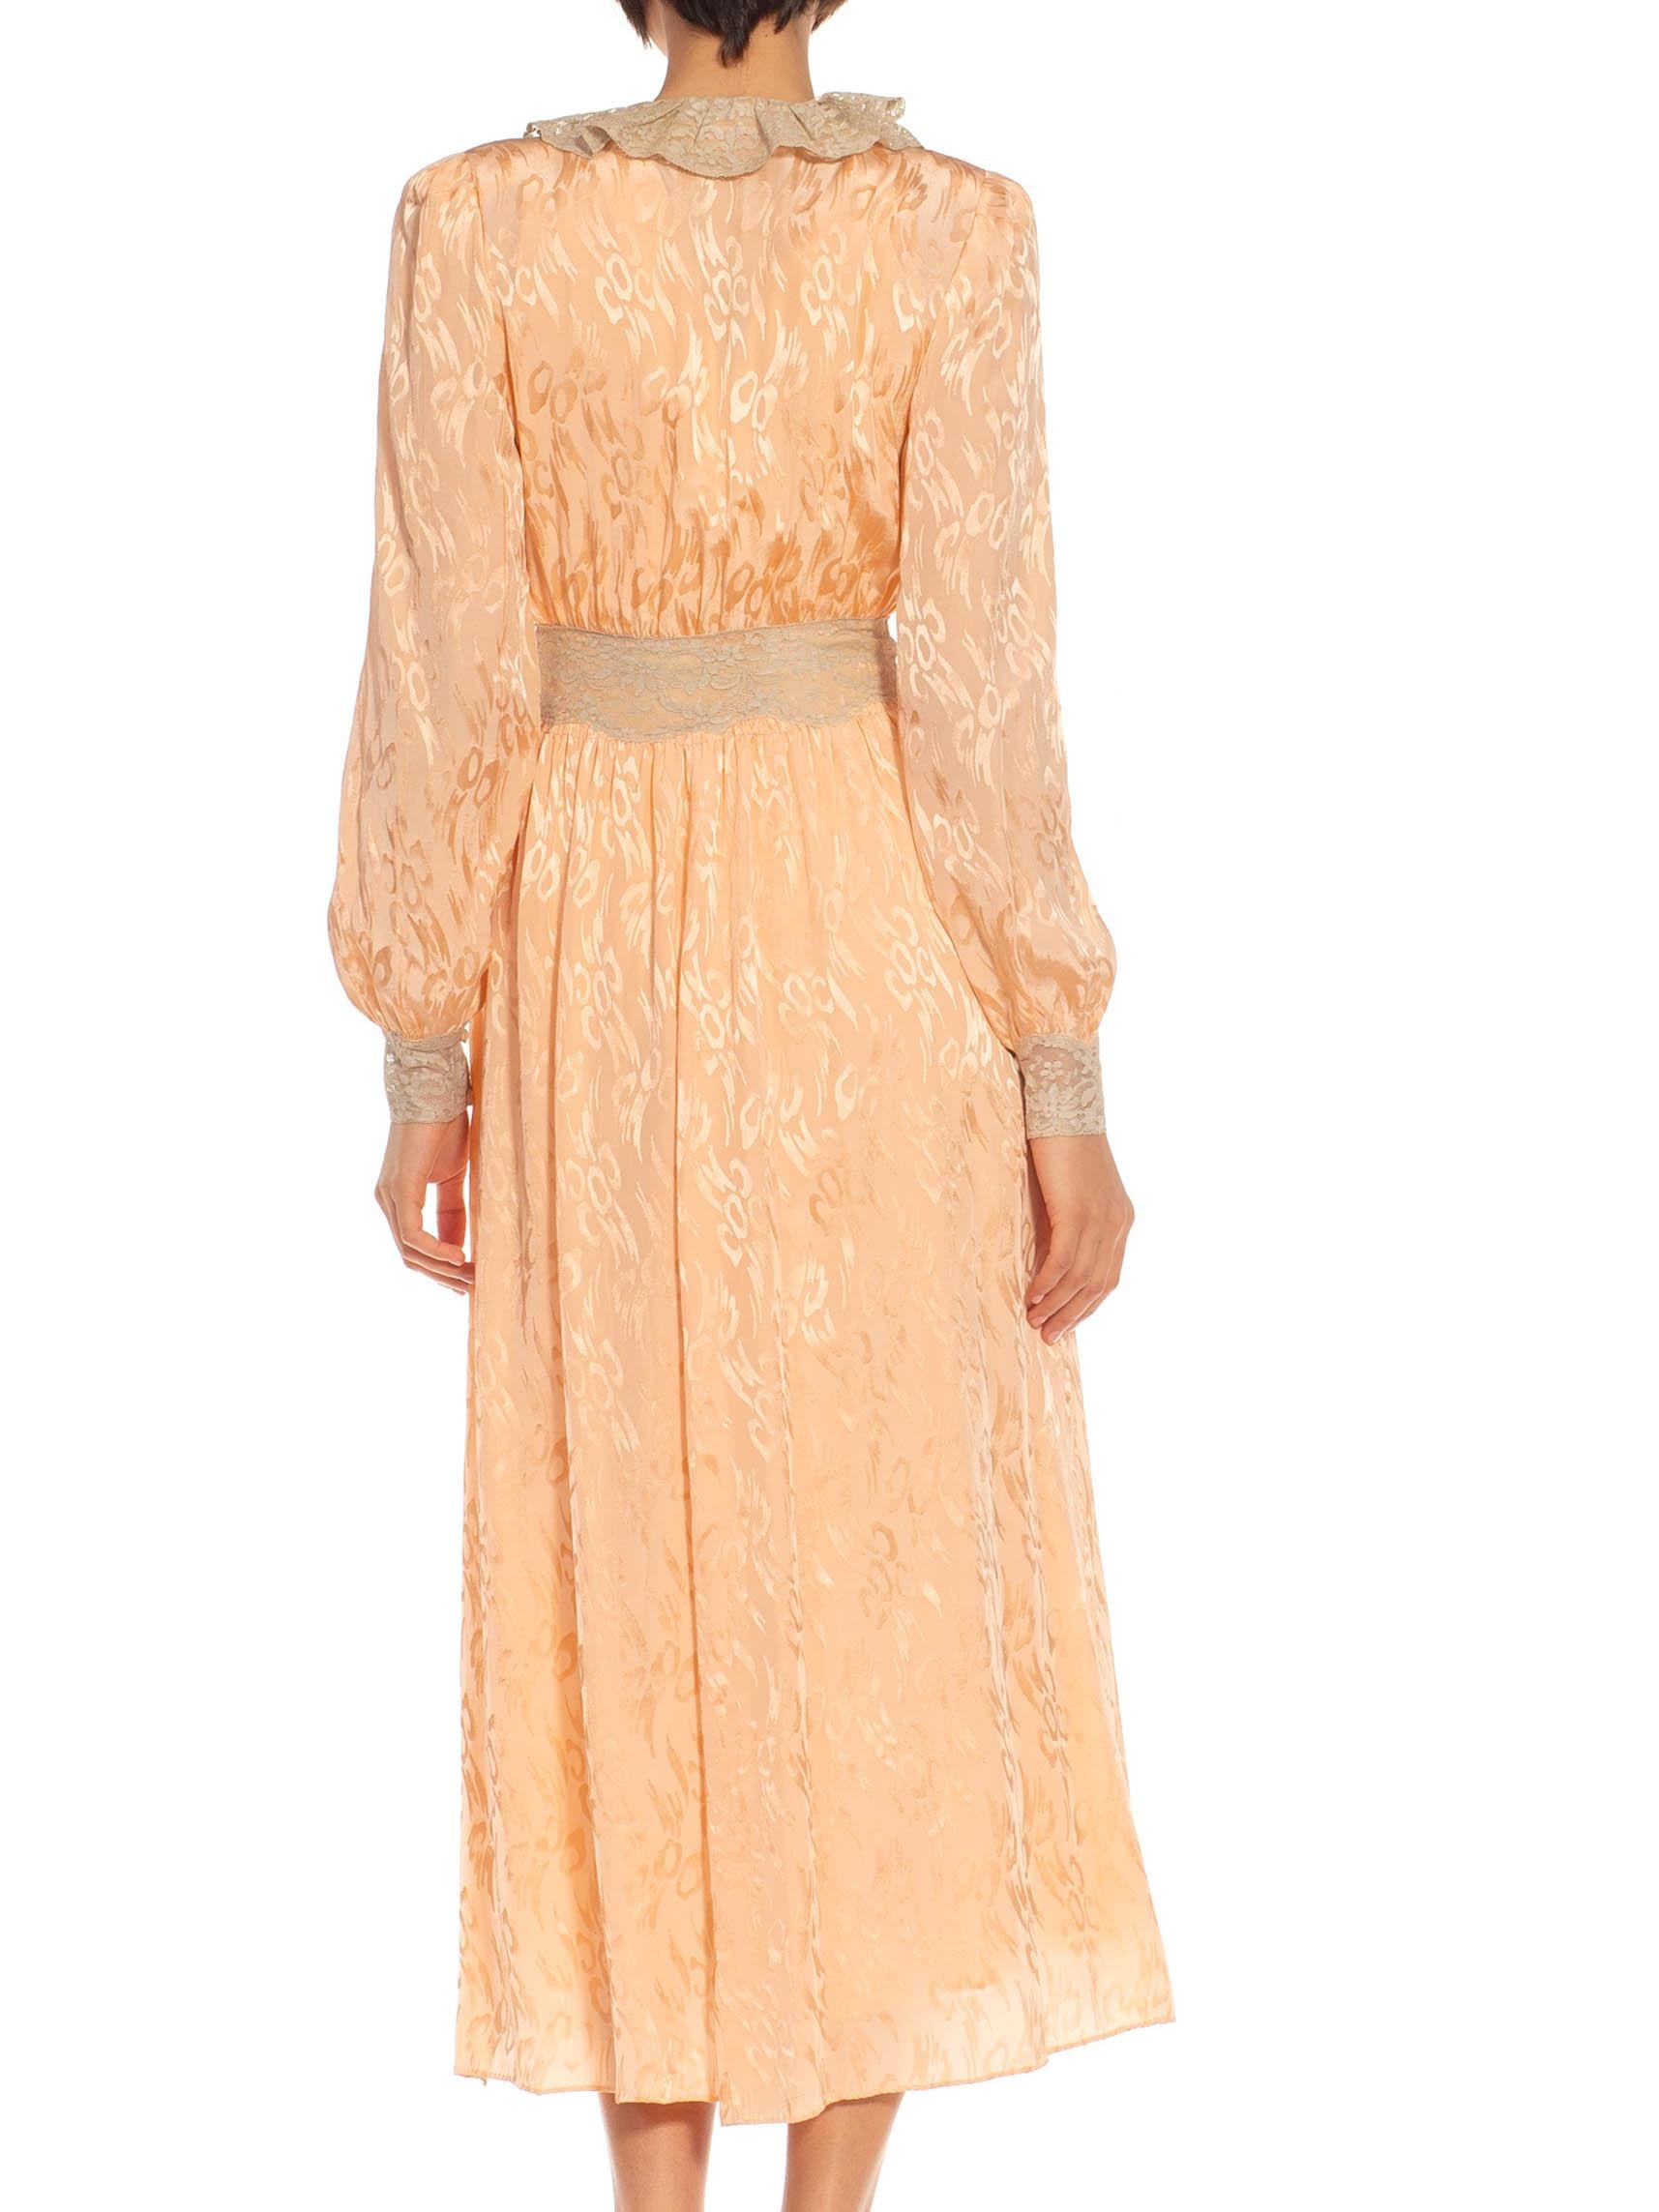 1940S Peach & Cream Lace Bias Cut Slip Dress With Jacket For Sale 4